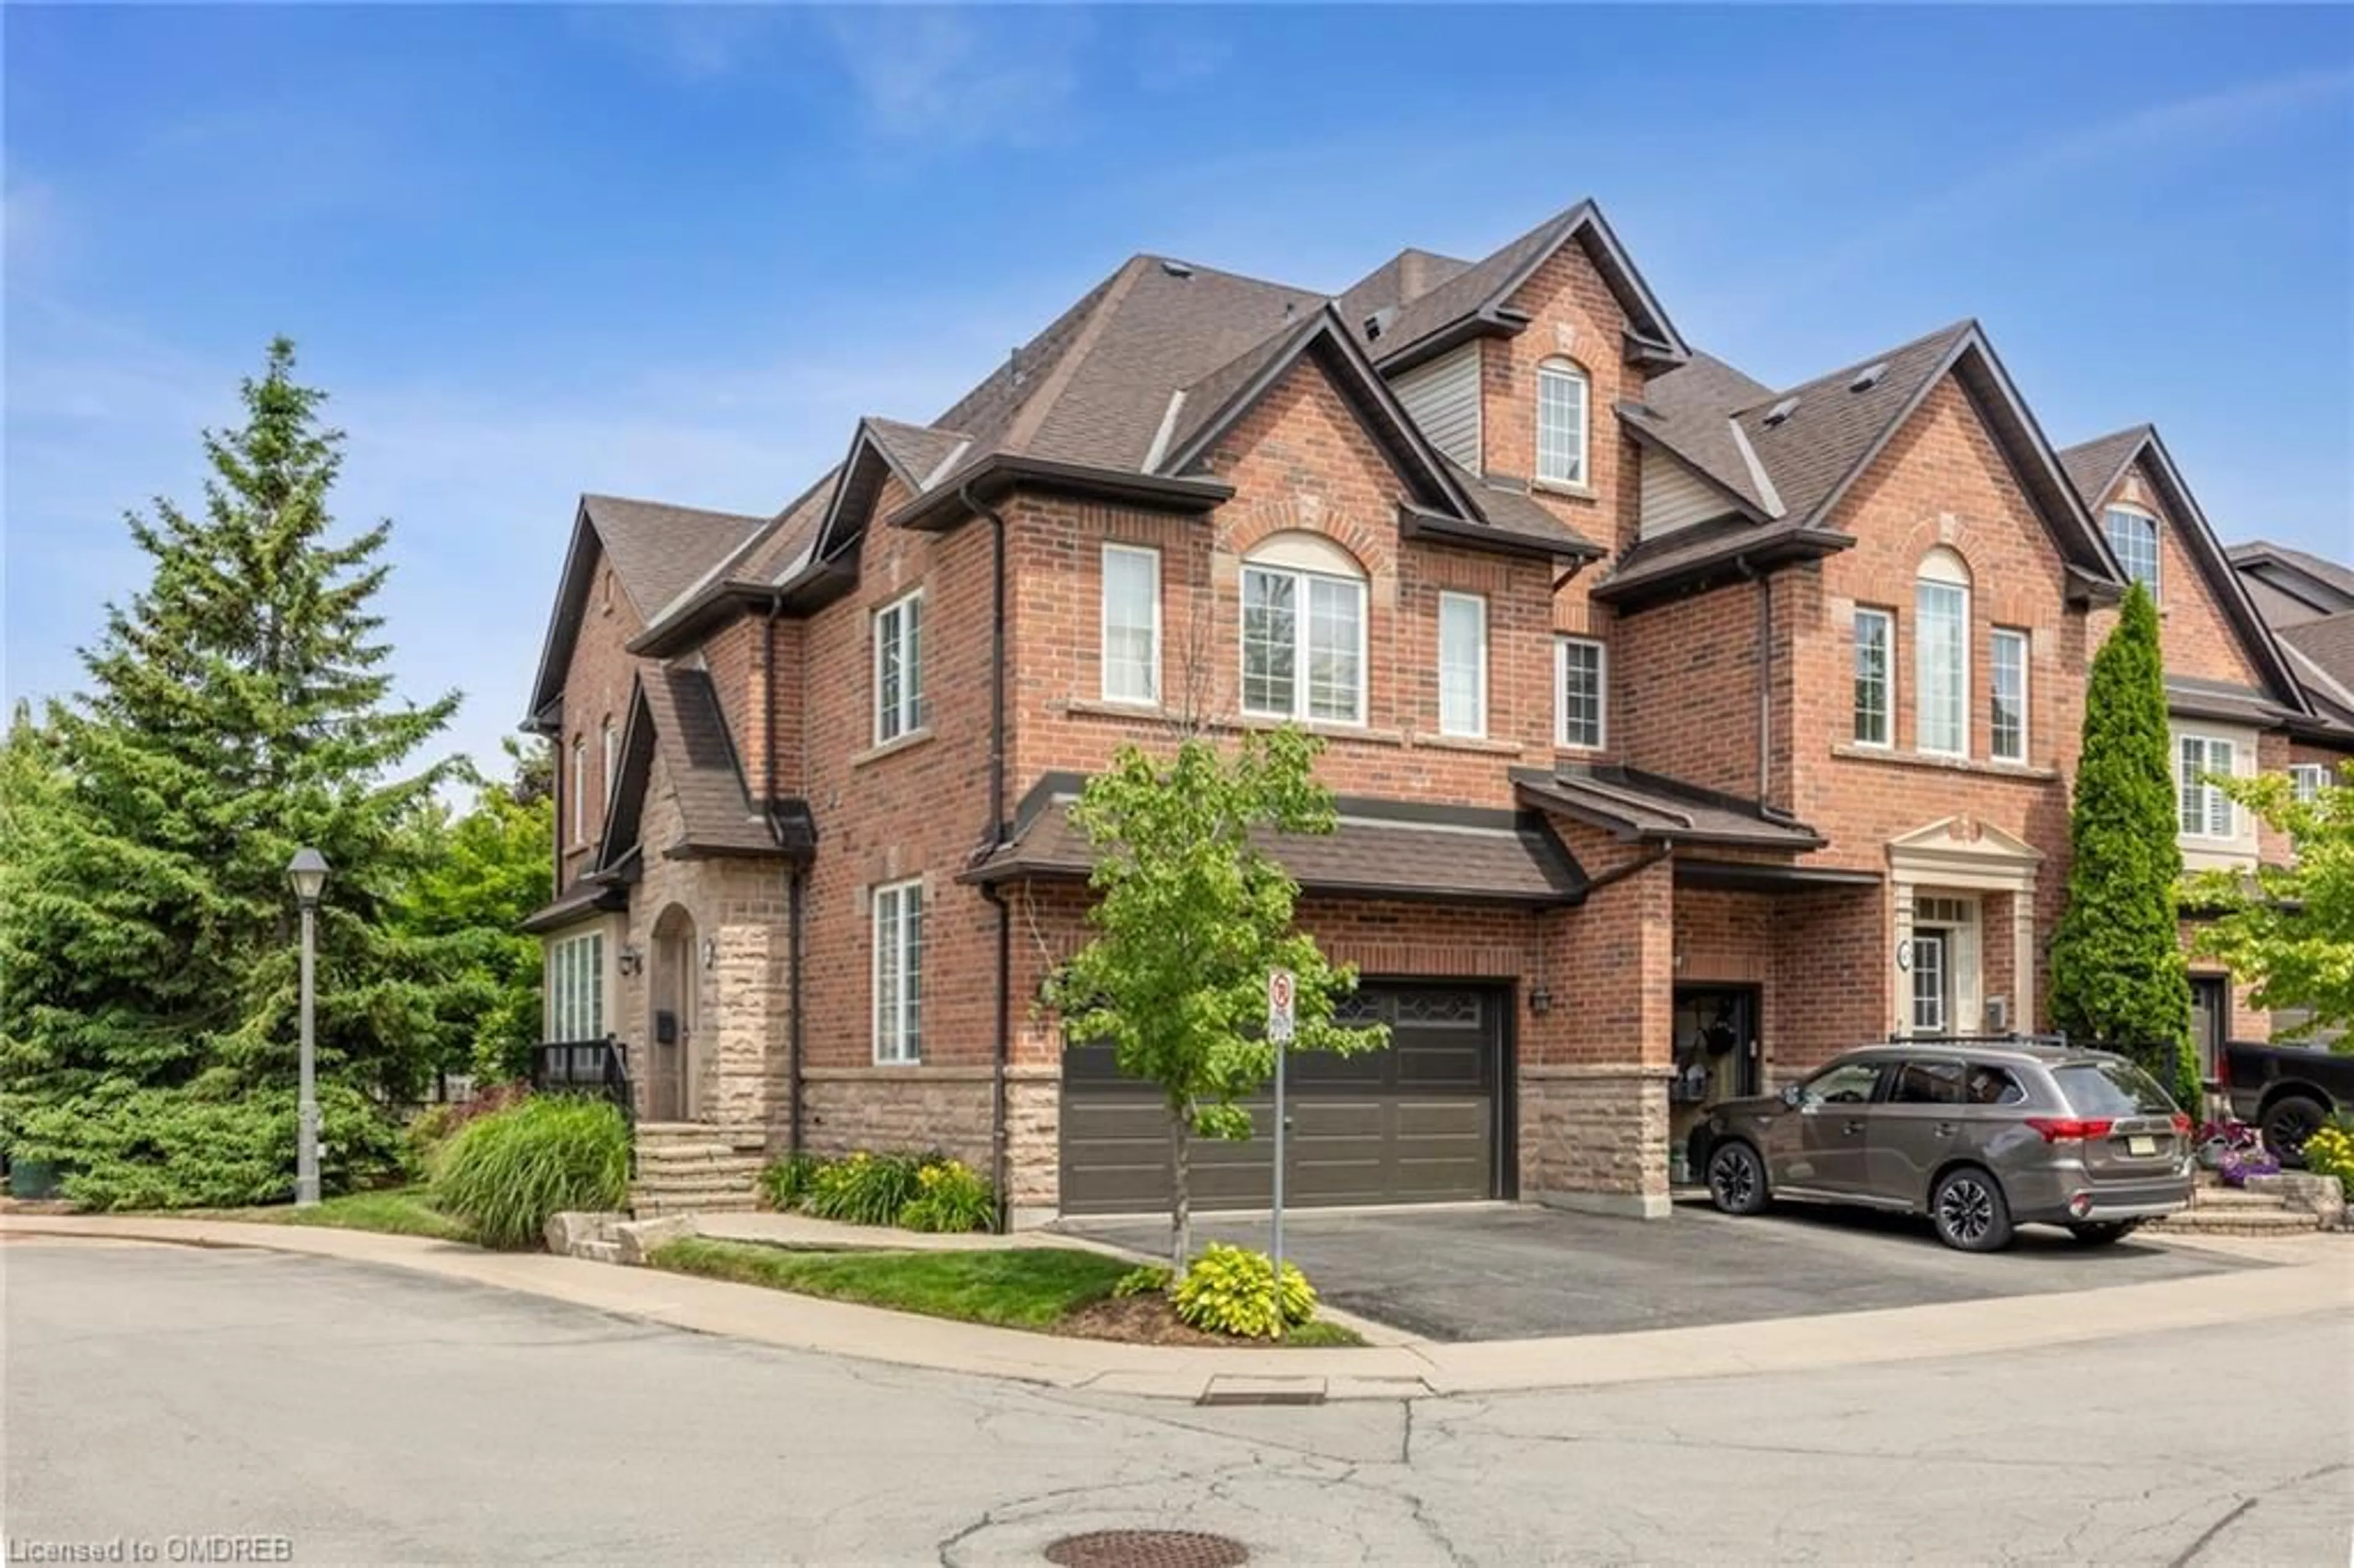 Home with brick exterior material for 300 Ravineview Way #44, Oakville Ontario L6H 7J2